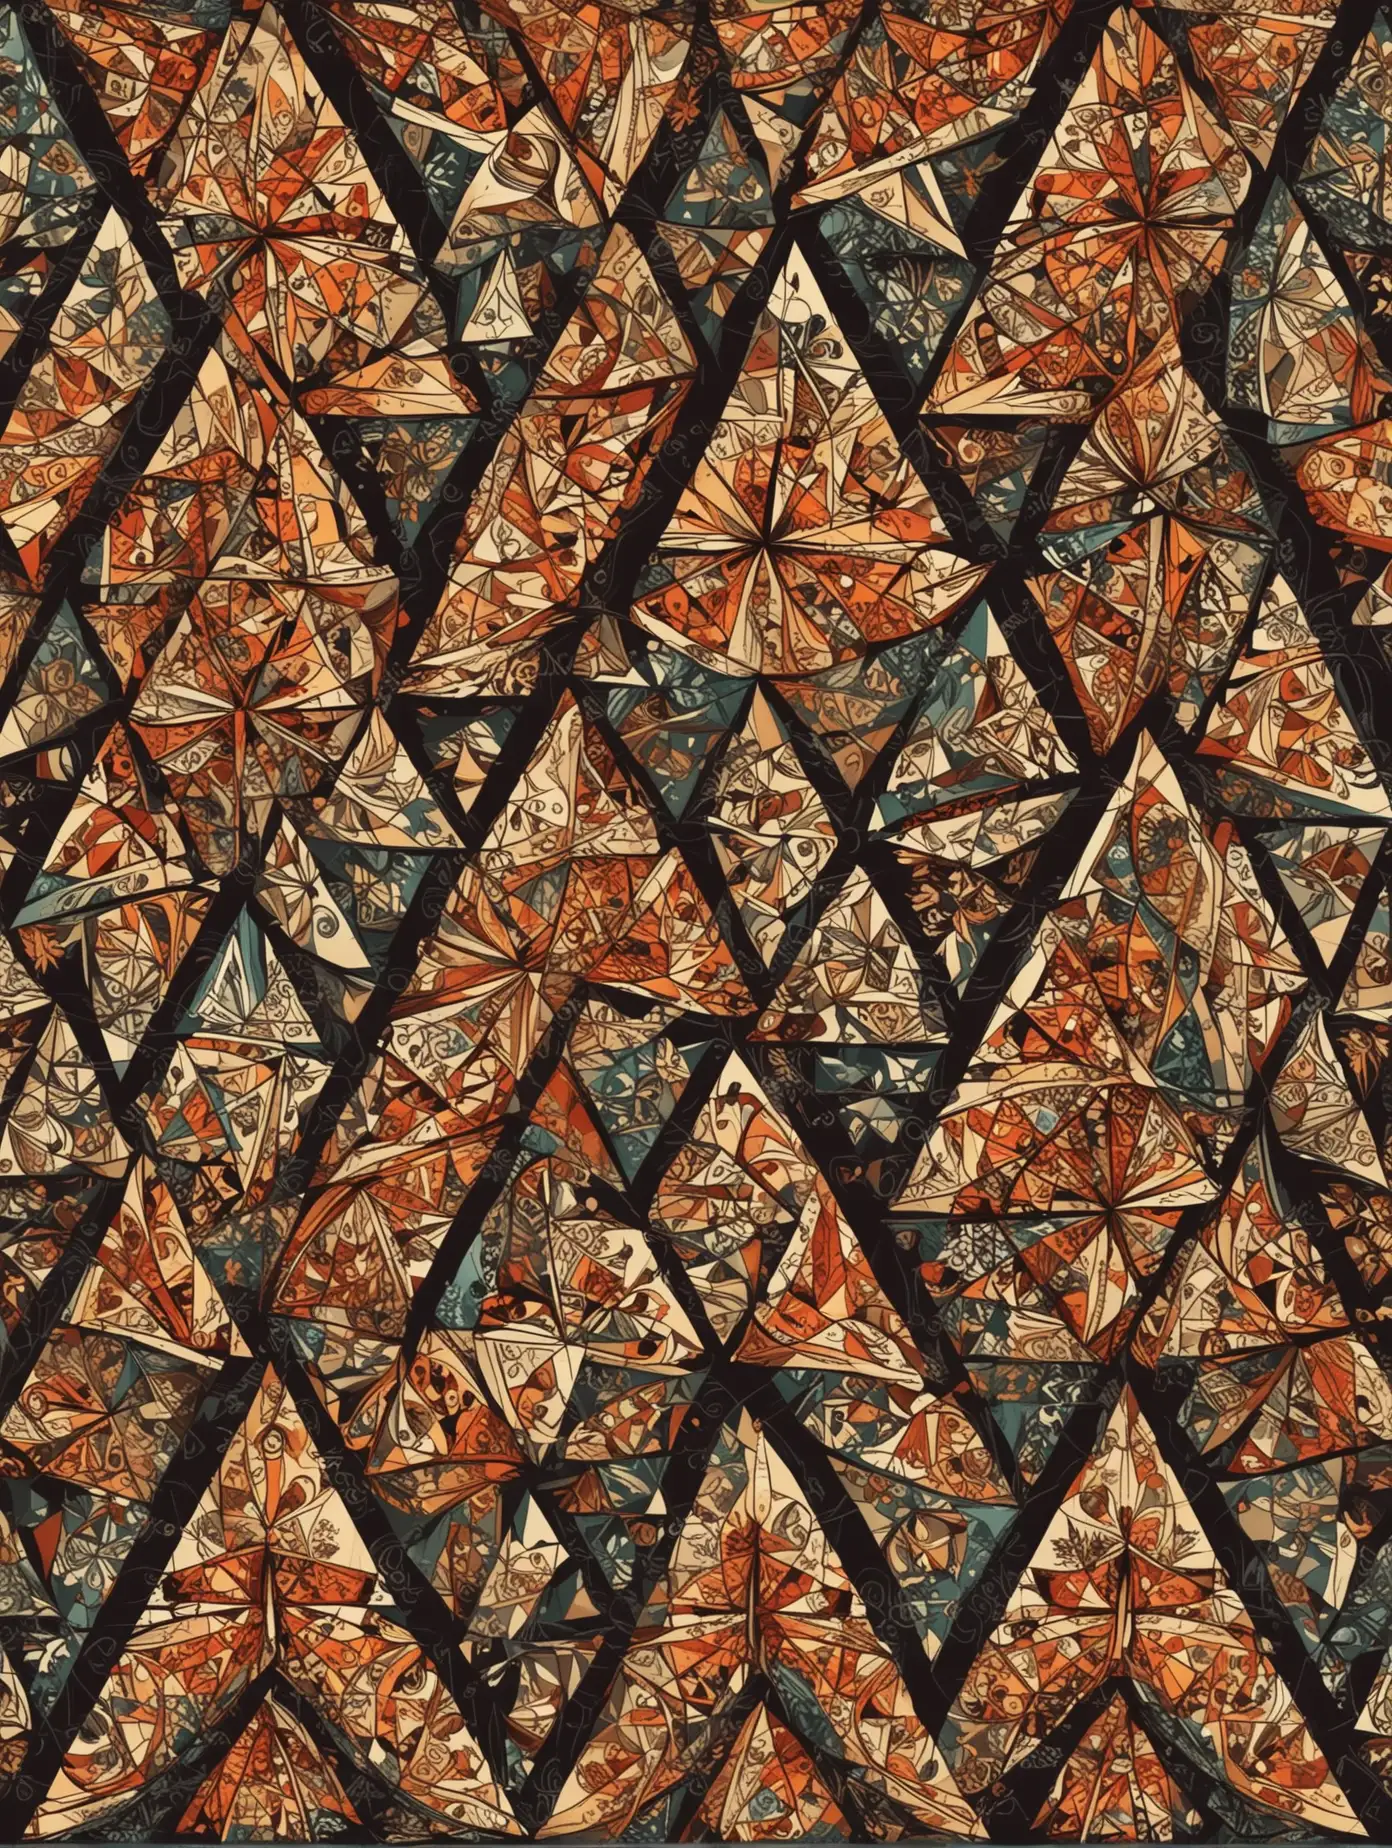 Baroque Style Geometric Patterns of Triangles Artwork